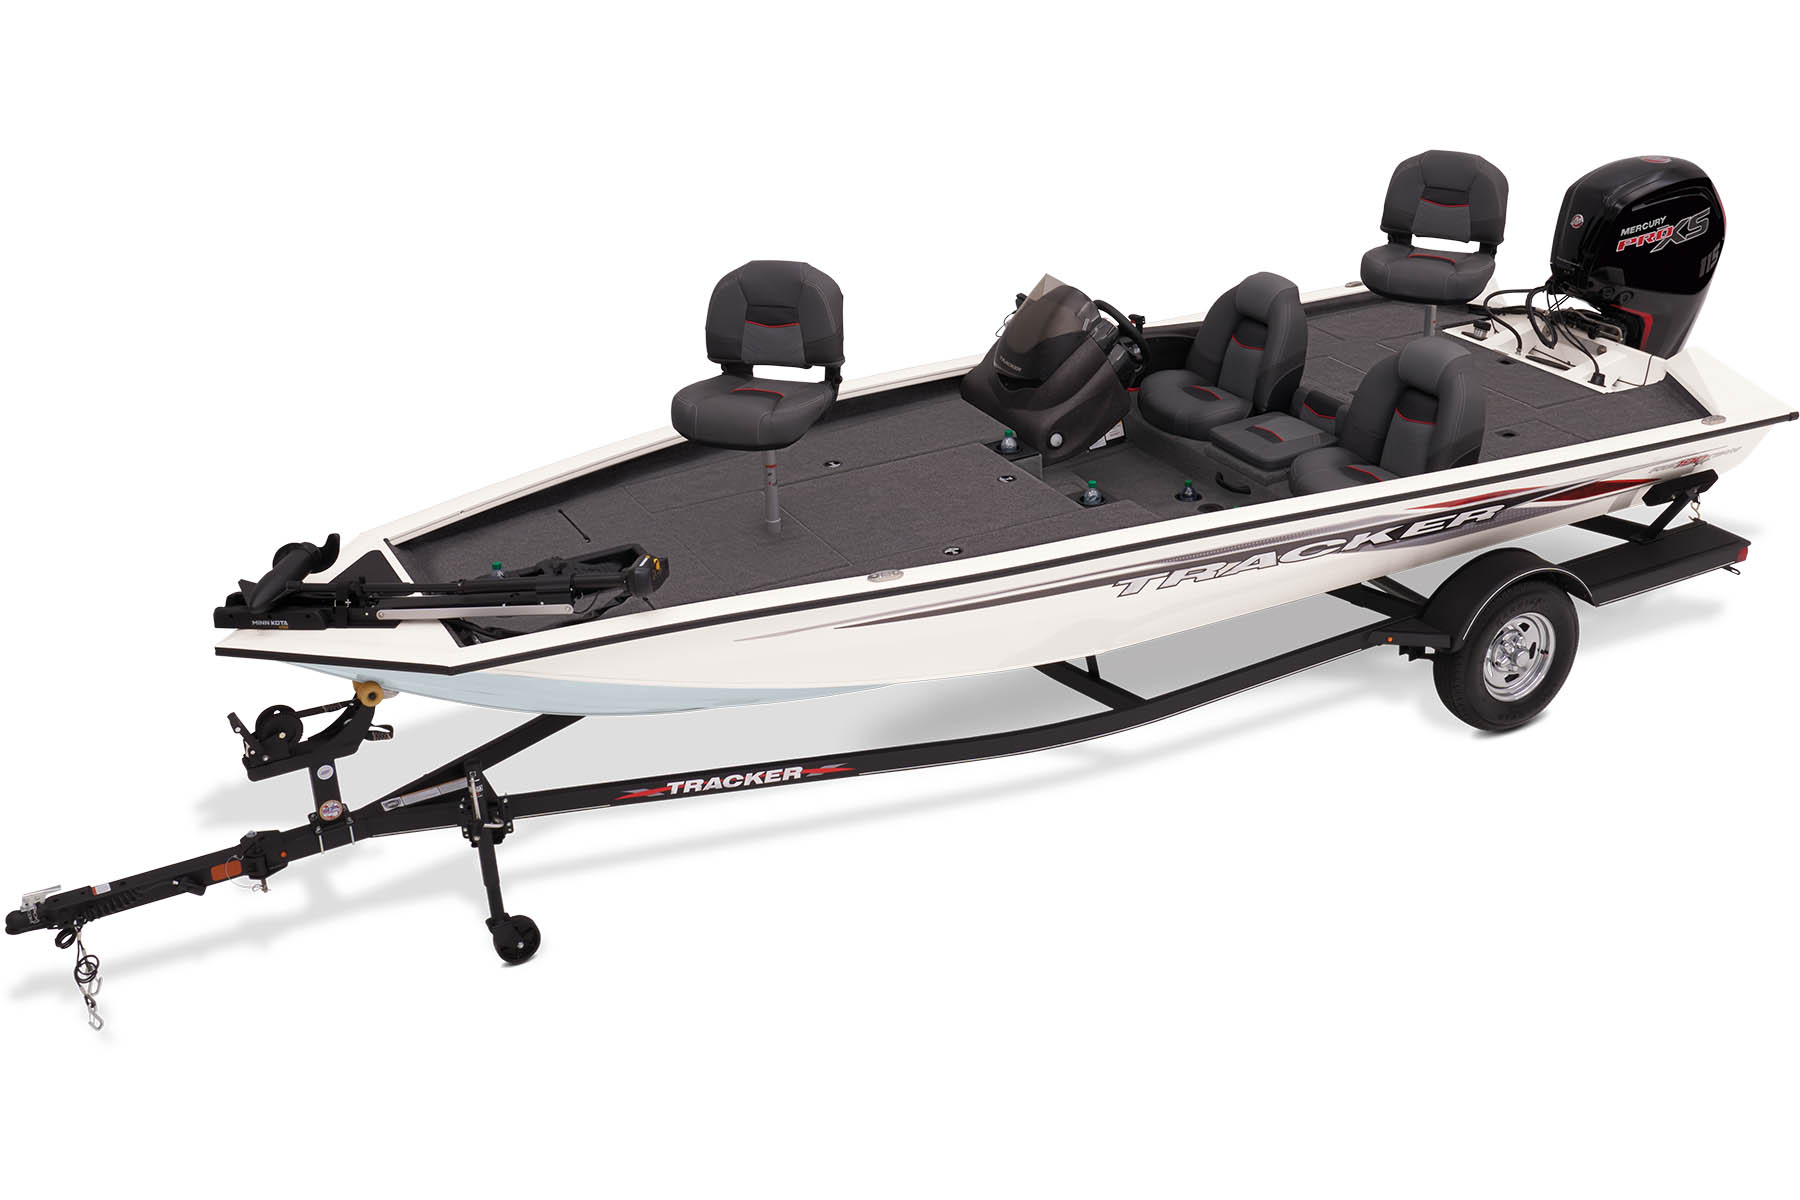 boat and marine cup holders  Bass boat storage, Bass boat ideas, Bass boat